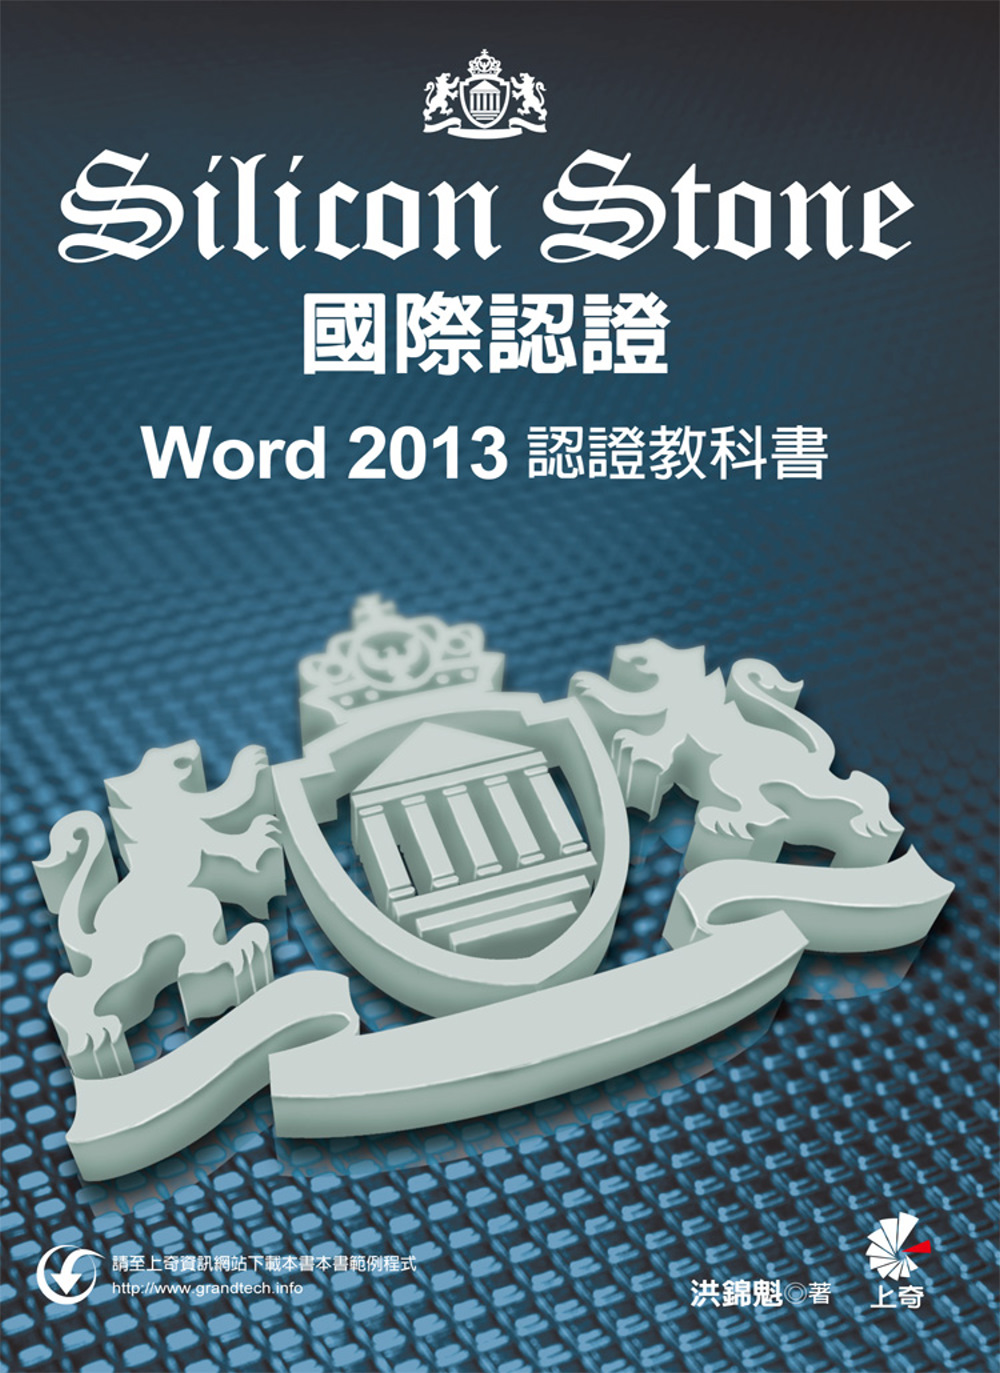 Word 2013 Silicon Stone 認證教科書